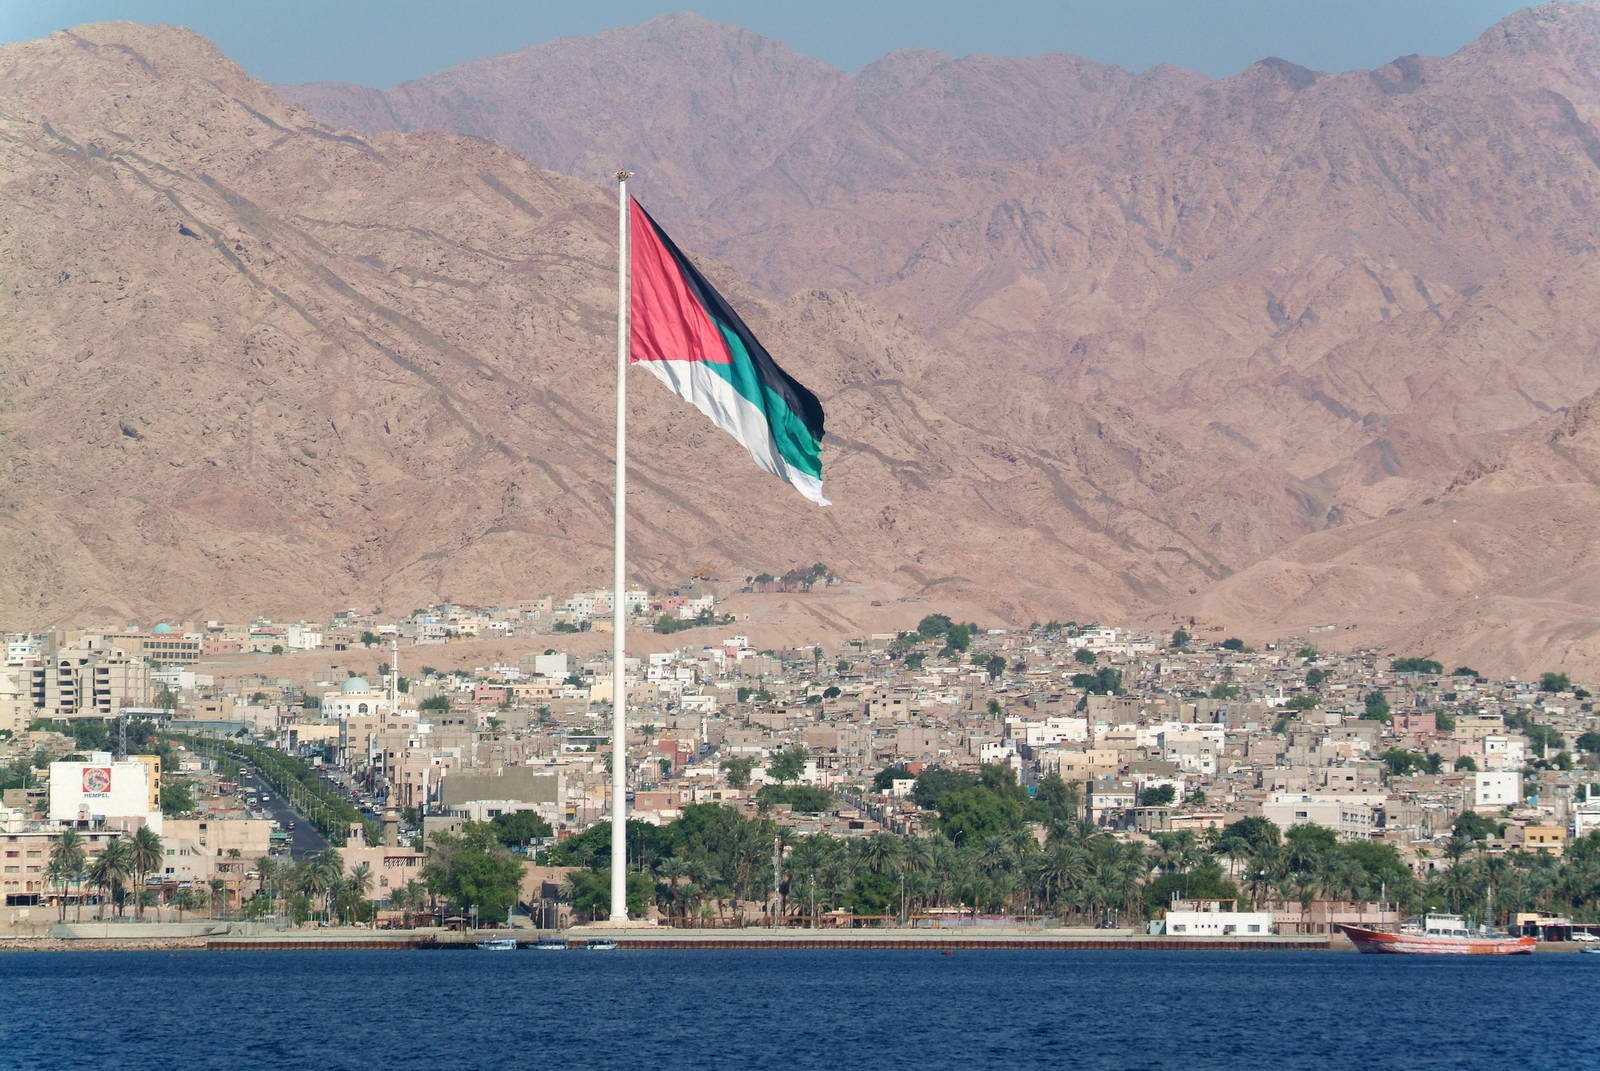 Aqaba Receives over 72,000 Visitors During Eid Holiday